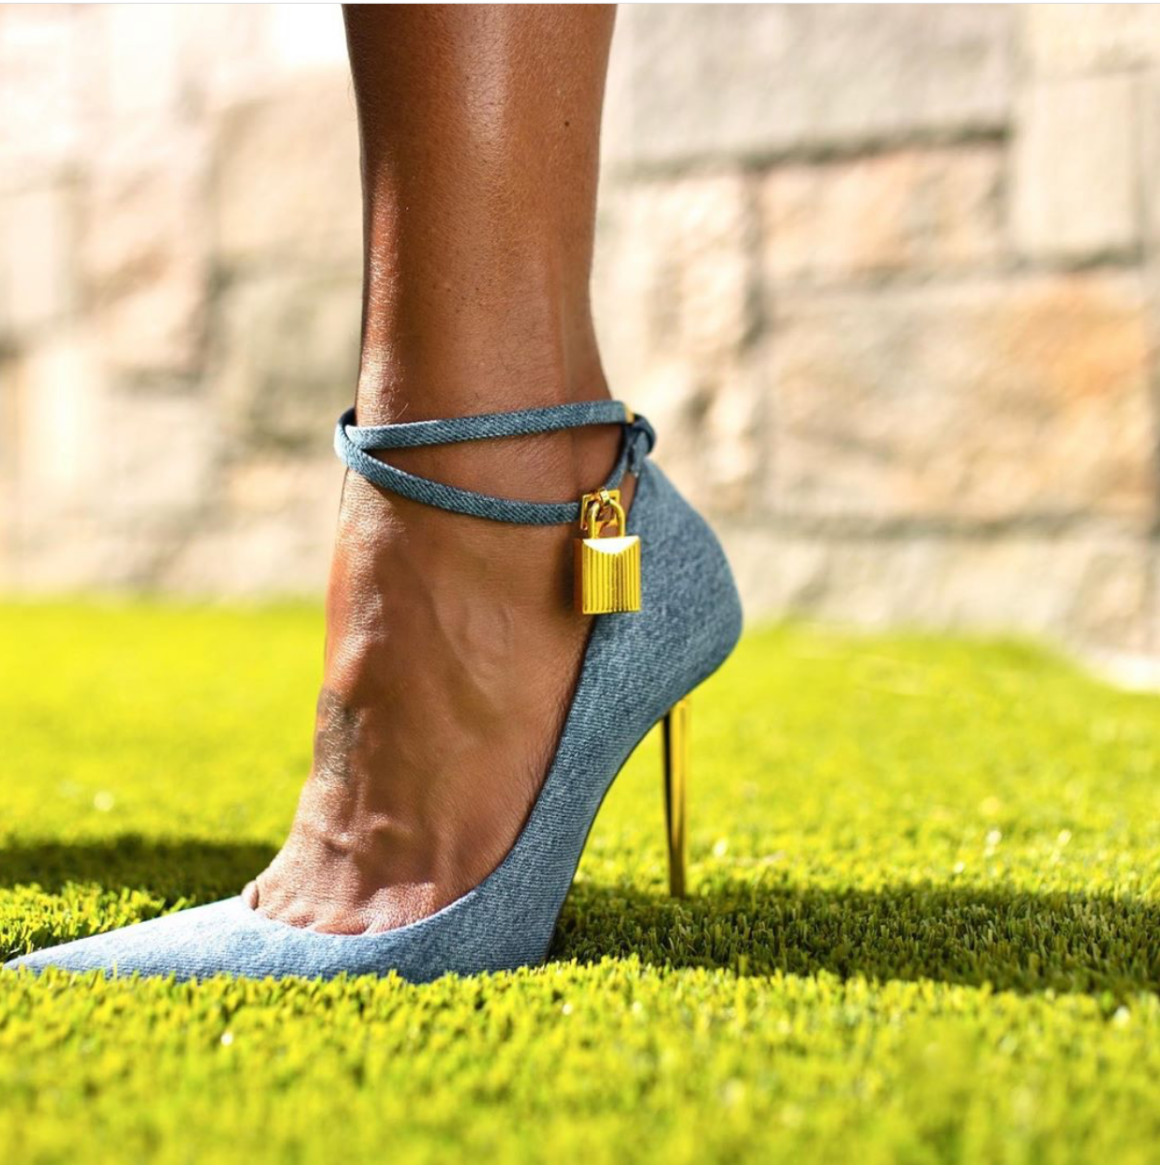 Bomb Product of the Day: Tom Ford Denim Padlock Pumps and Sandals